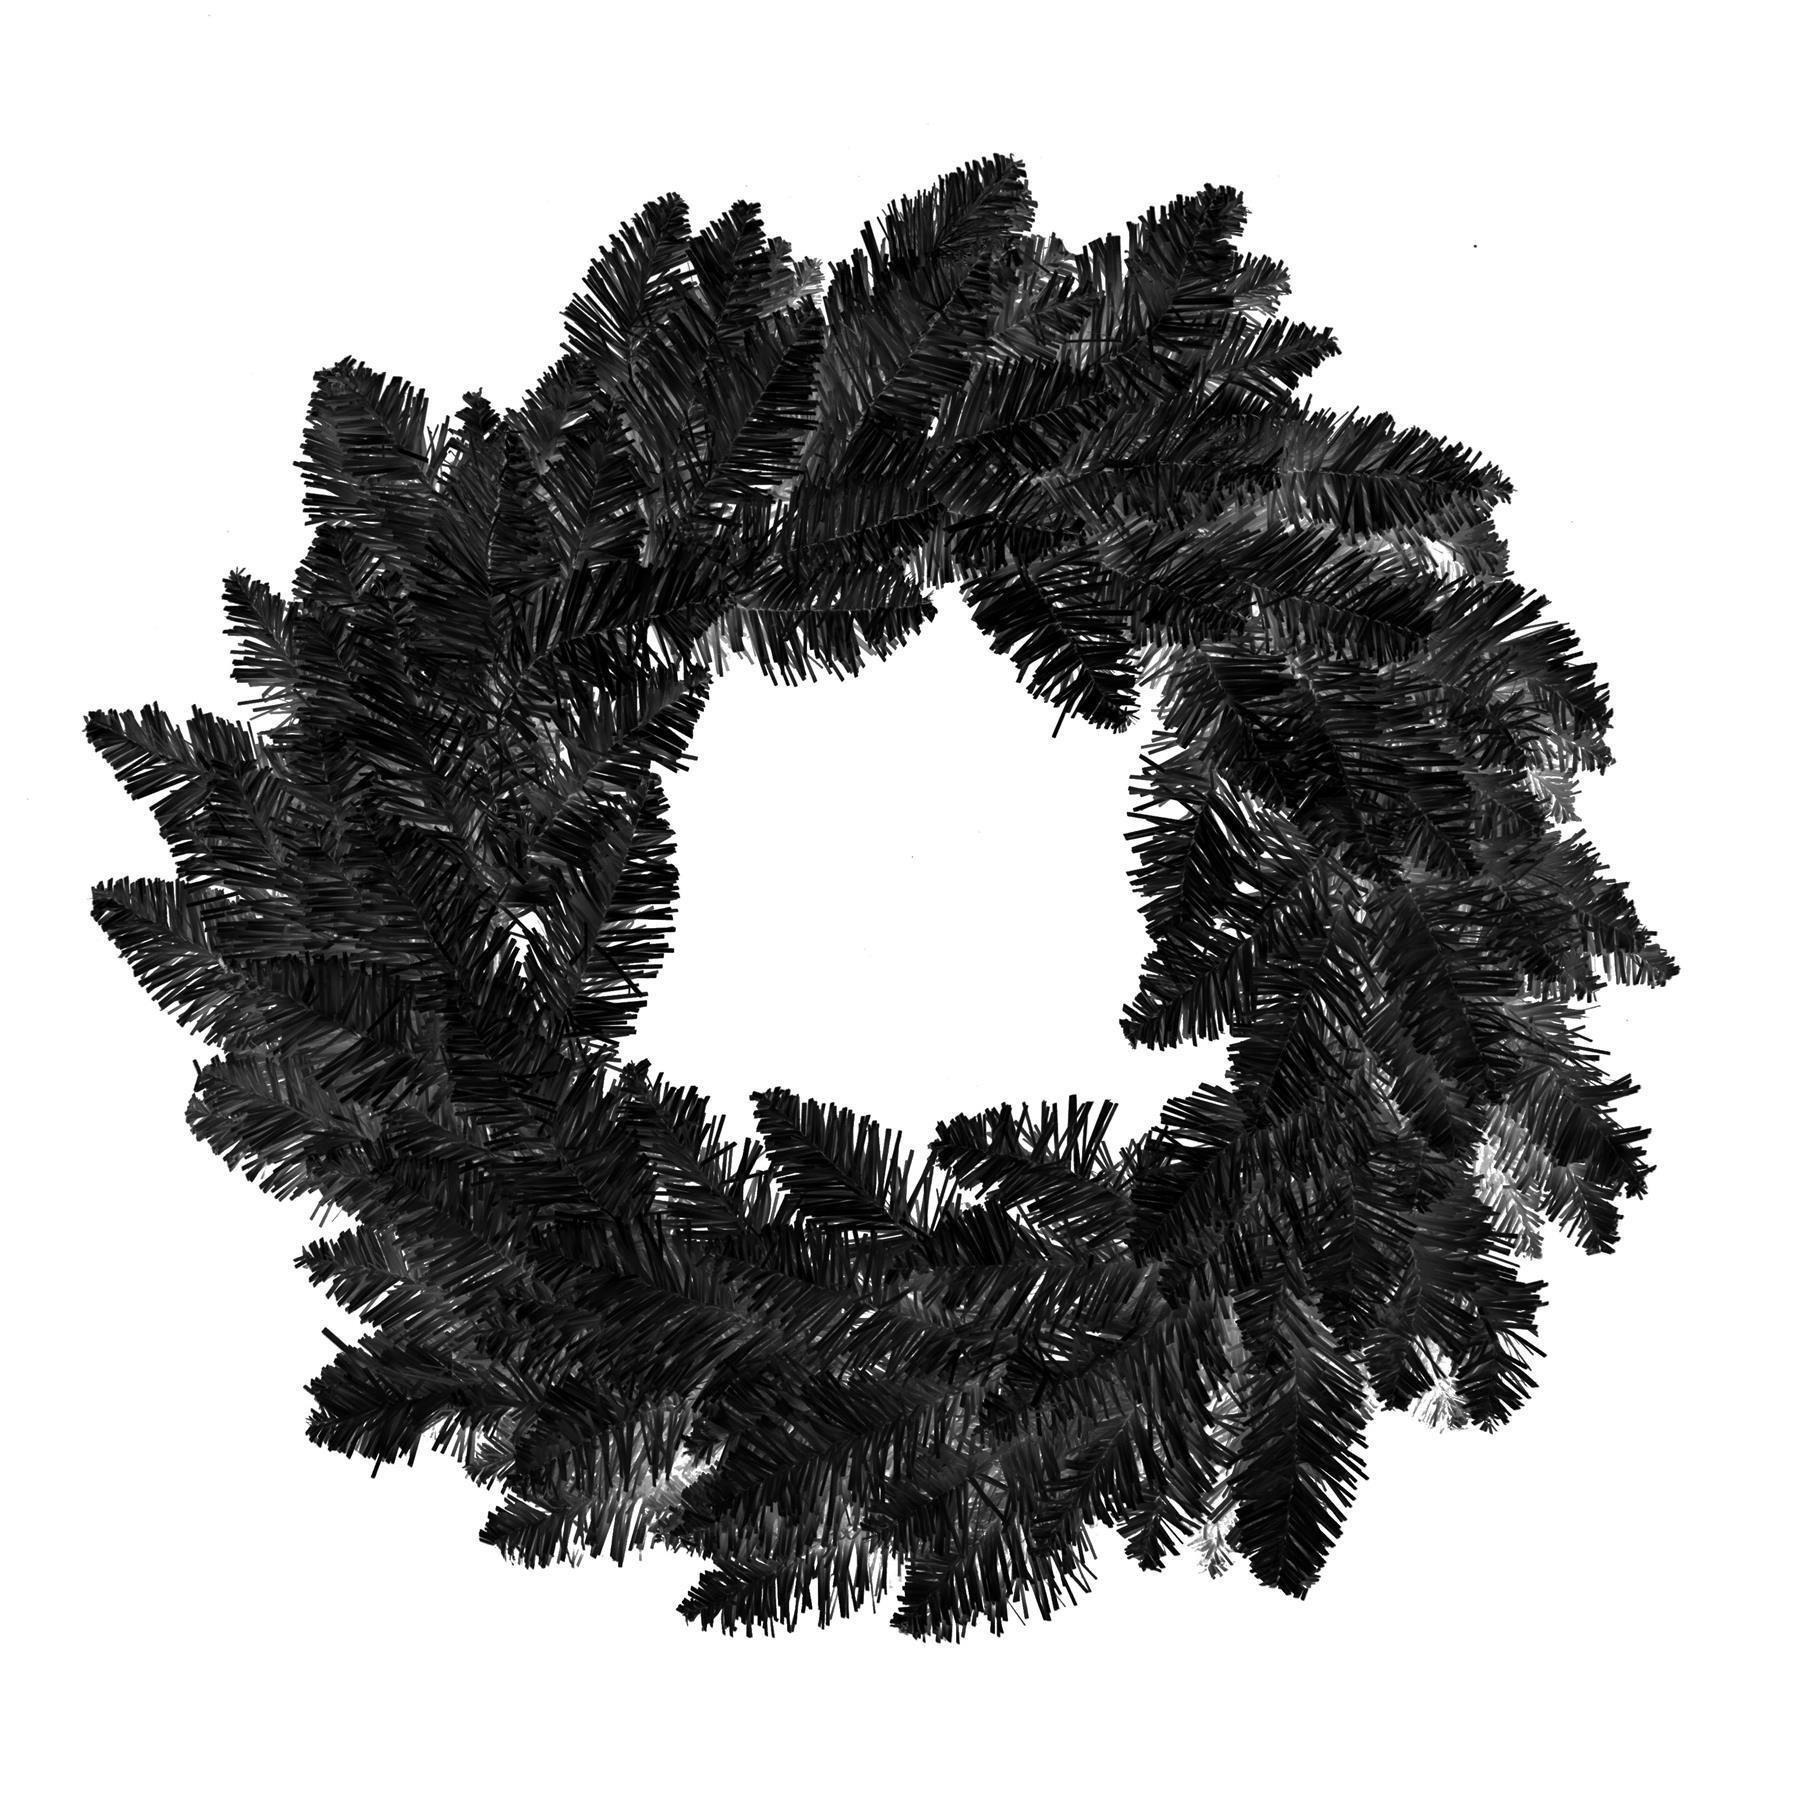 Black Imperial Pine Wreath Christmas Holiday Xmas Home Office Fireplaces Stairs Decoration - image 1